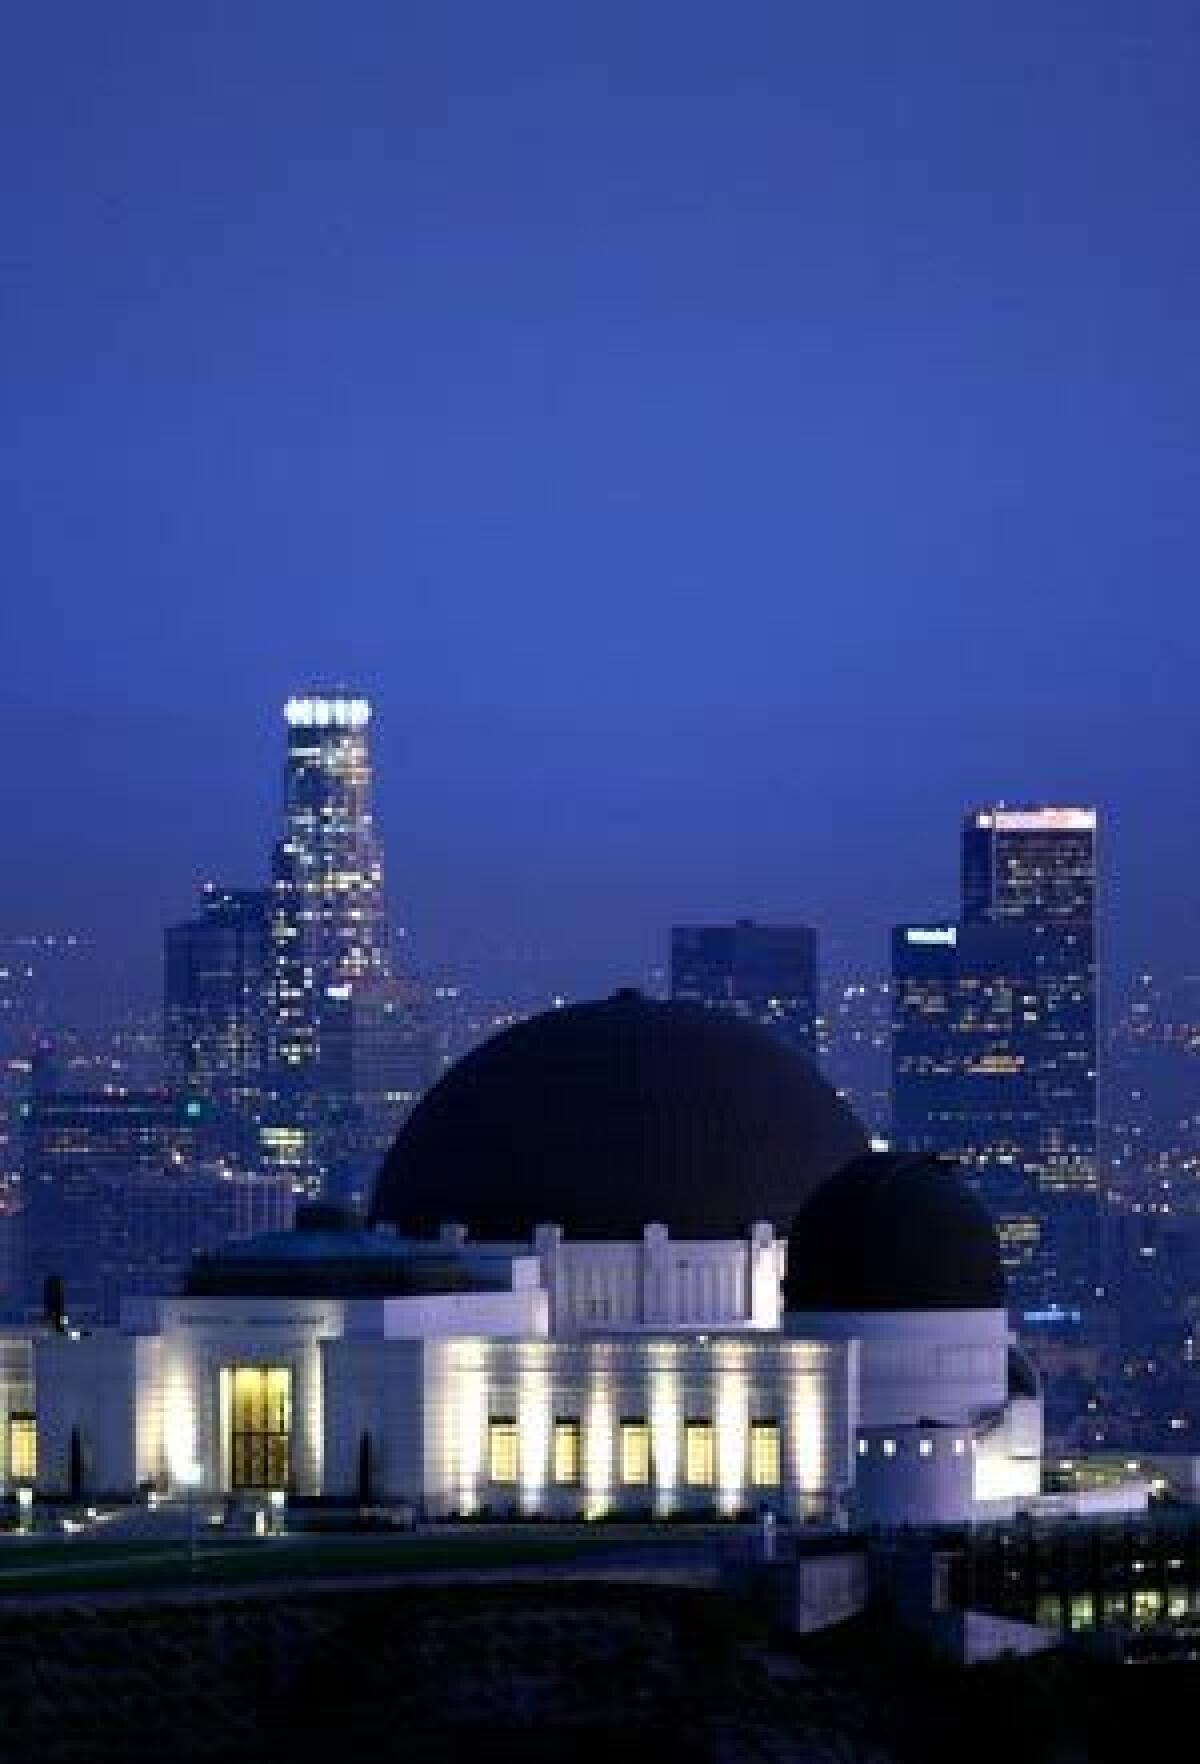 The Griffith Observatory at night with downtown Los Angeles in the background.